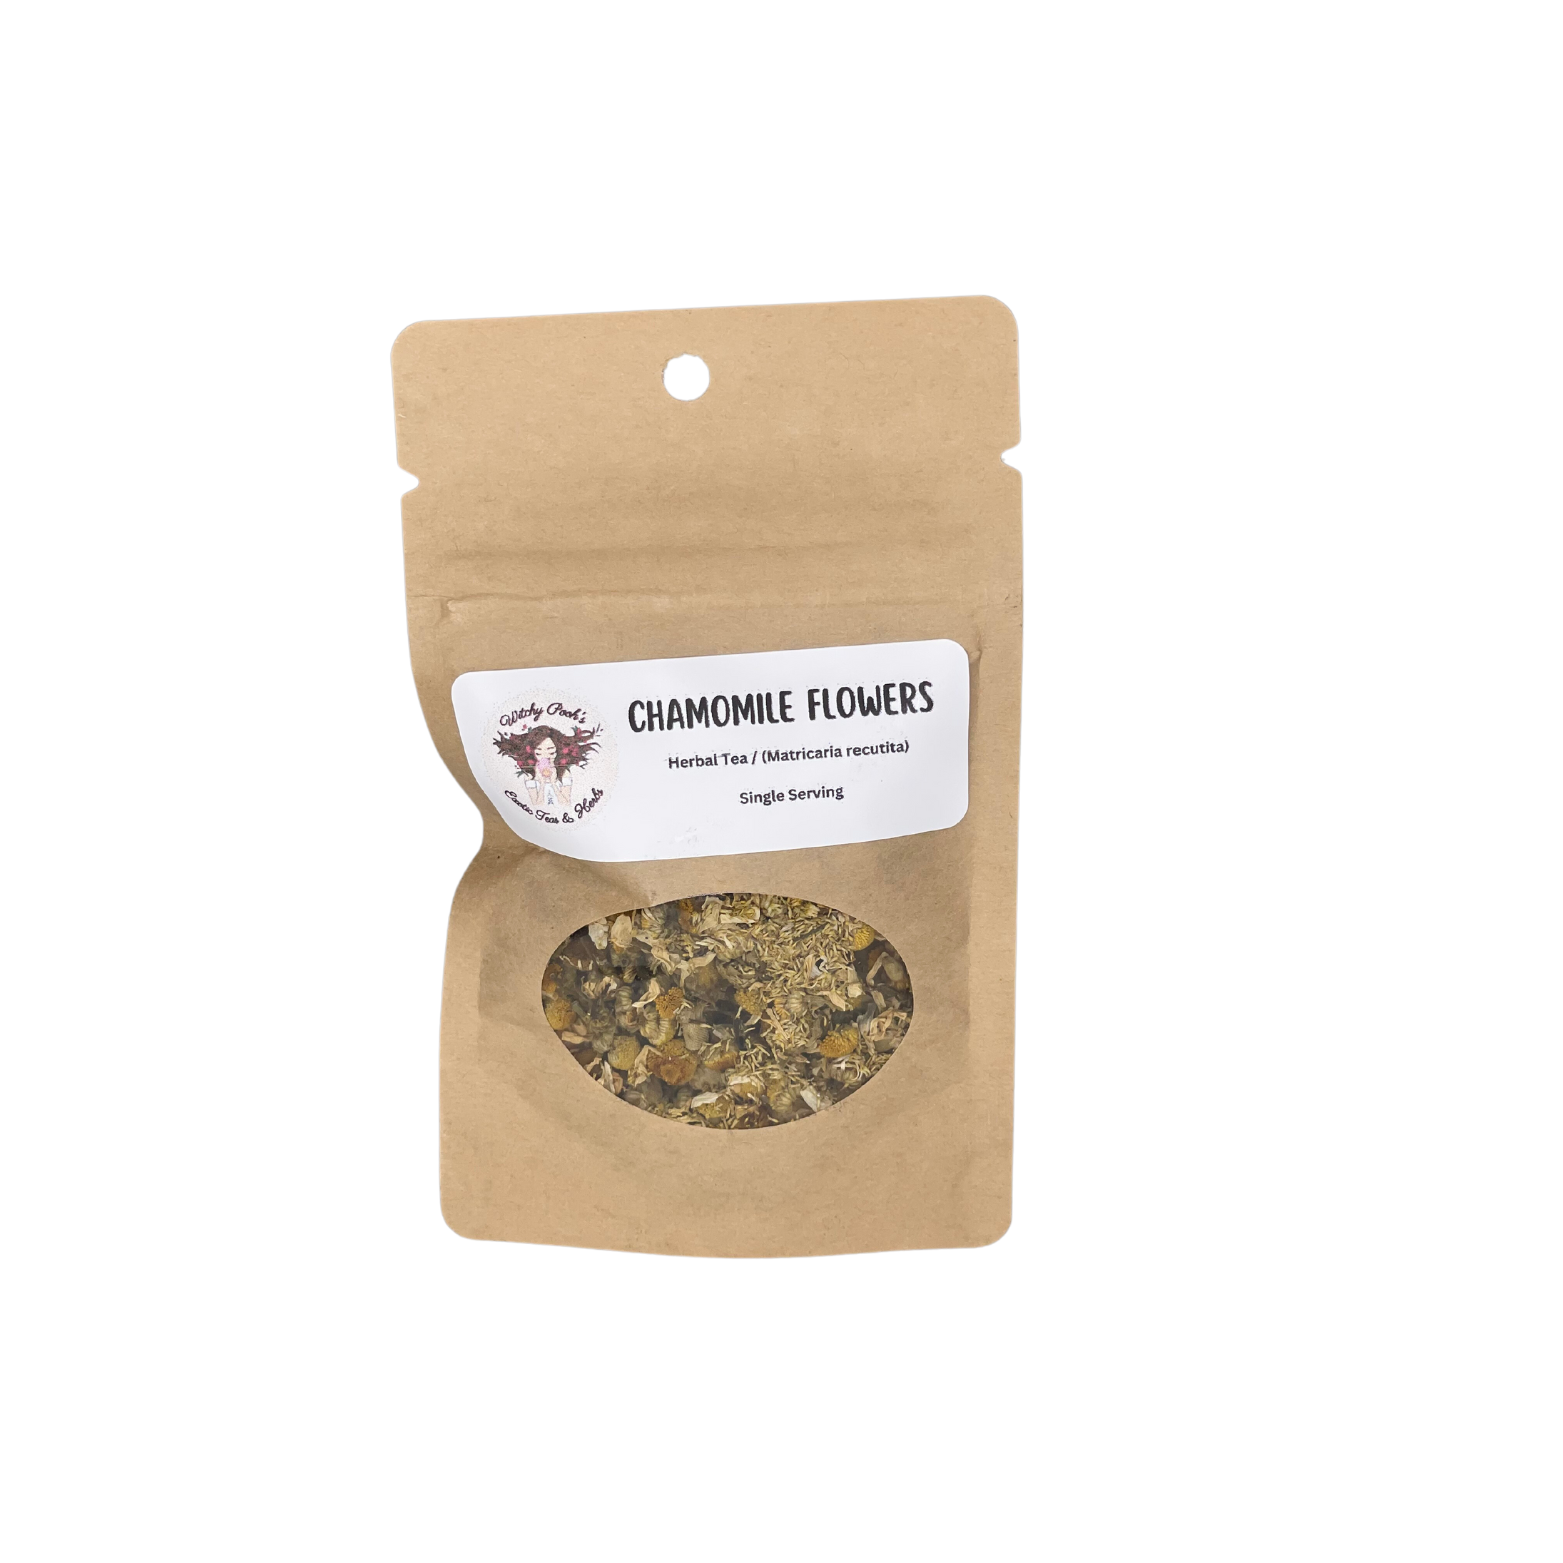 Witchy Pooh's Chamomile Flowers Loose Leaf Herbal Tea, Caffeine Free, For Stress Relief and Sleep Aid-11